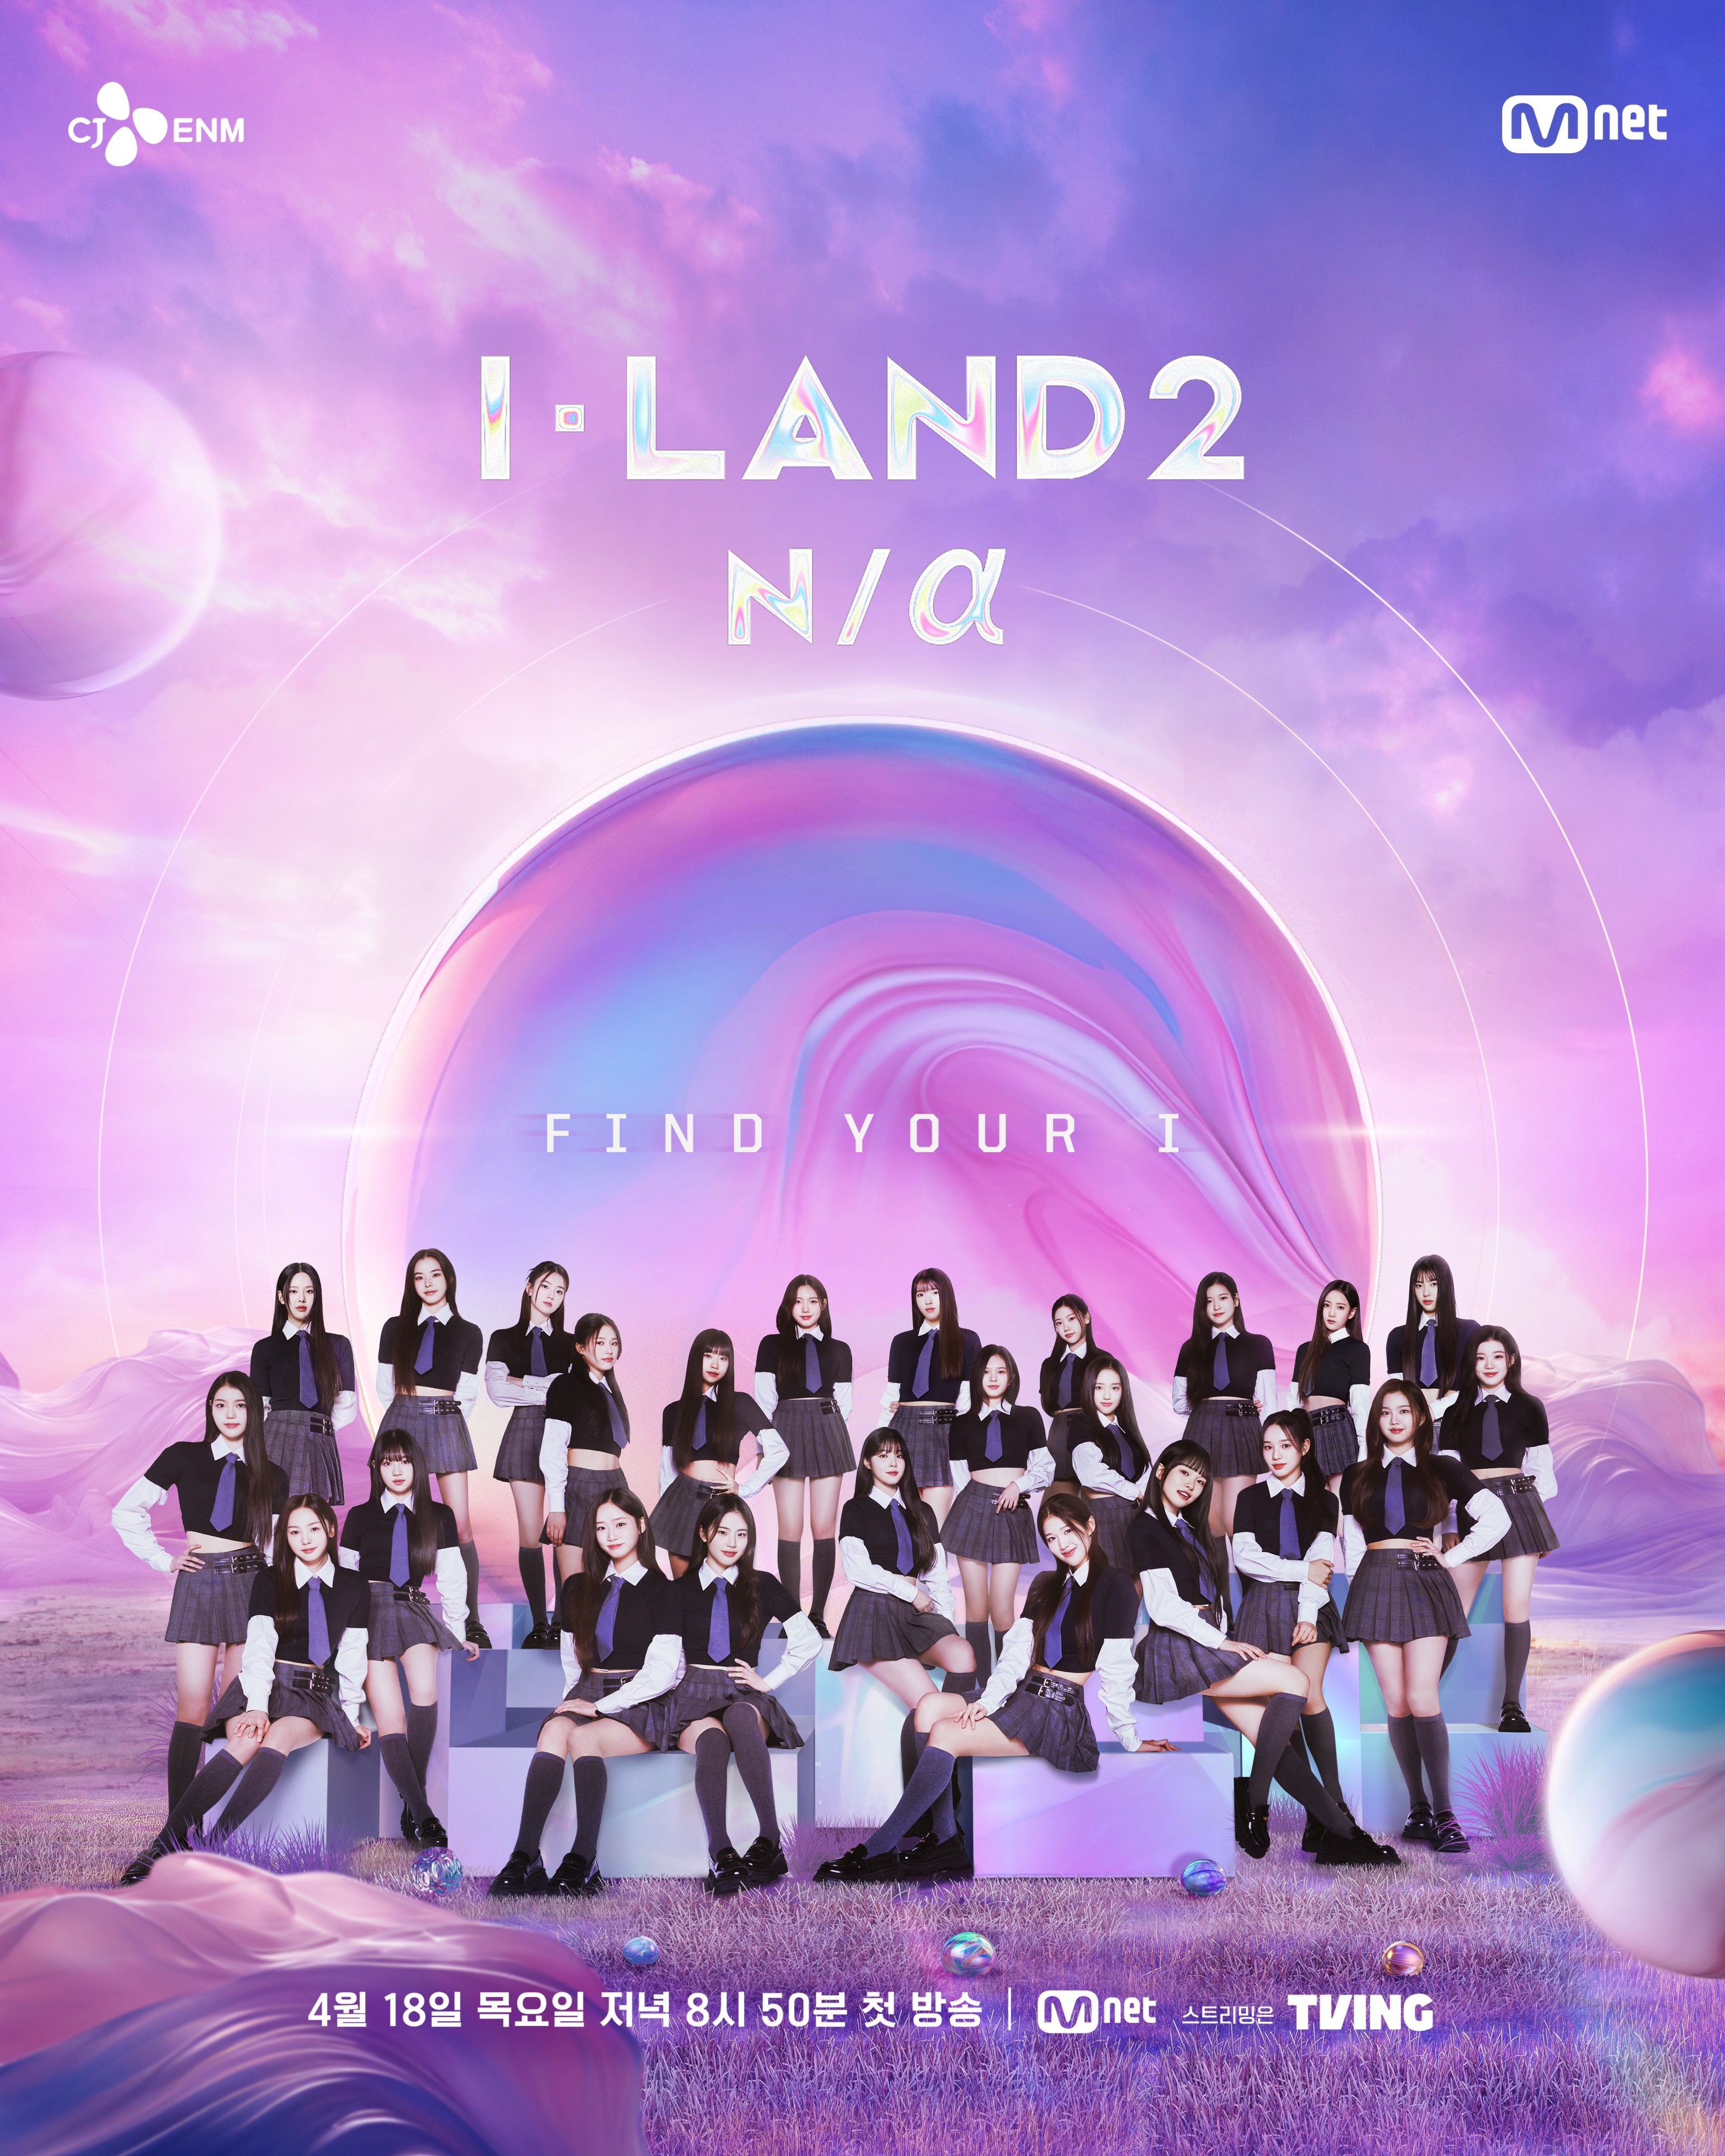 Watch: Mnet’s Upcoming Girl Group Survival Show “I-LAND2: N/a” Highlights All 24 Contestants In Group Teasers